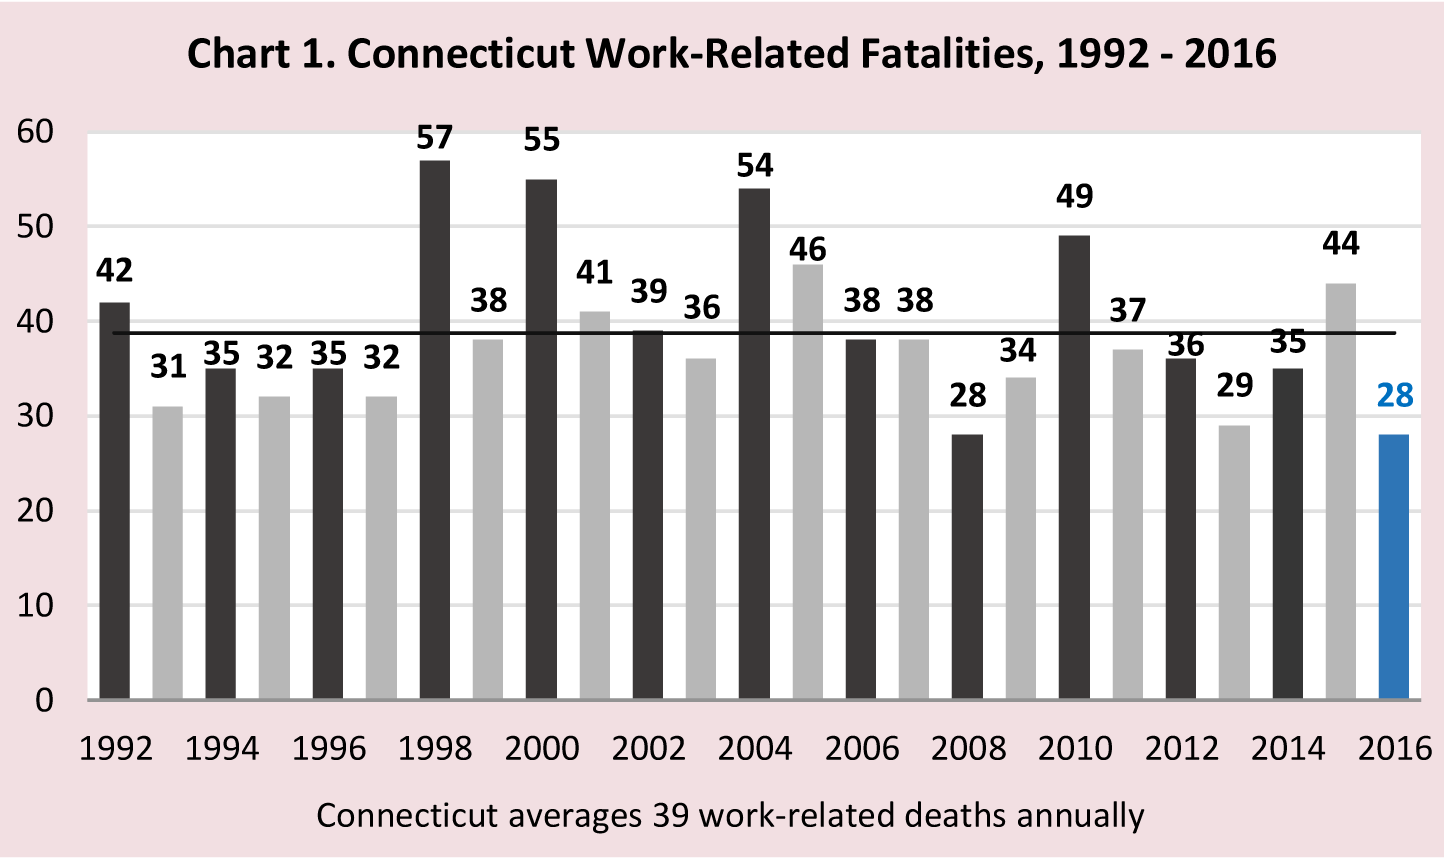 Chart 1. Connecticut Work-Related Fatalities, 1992-2016